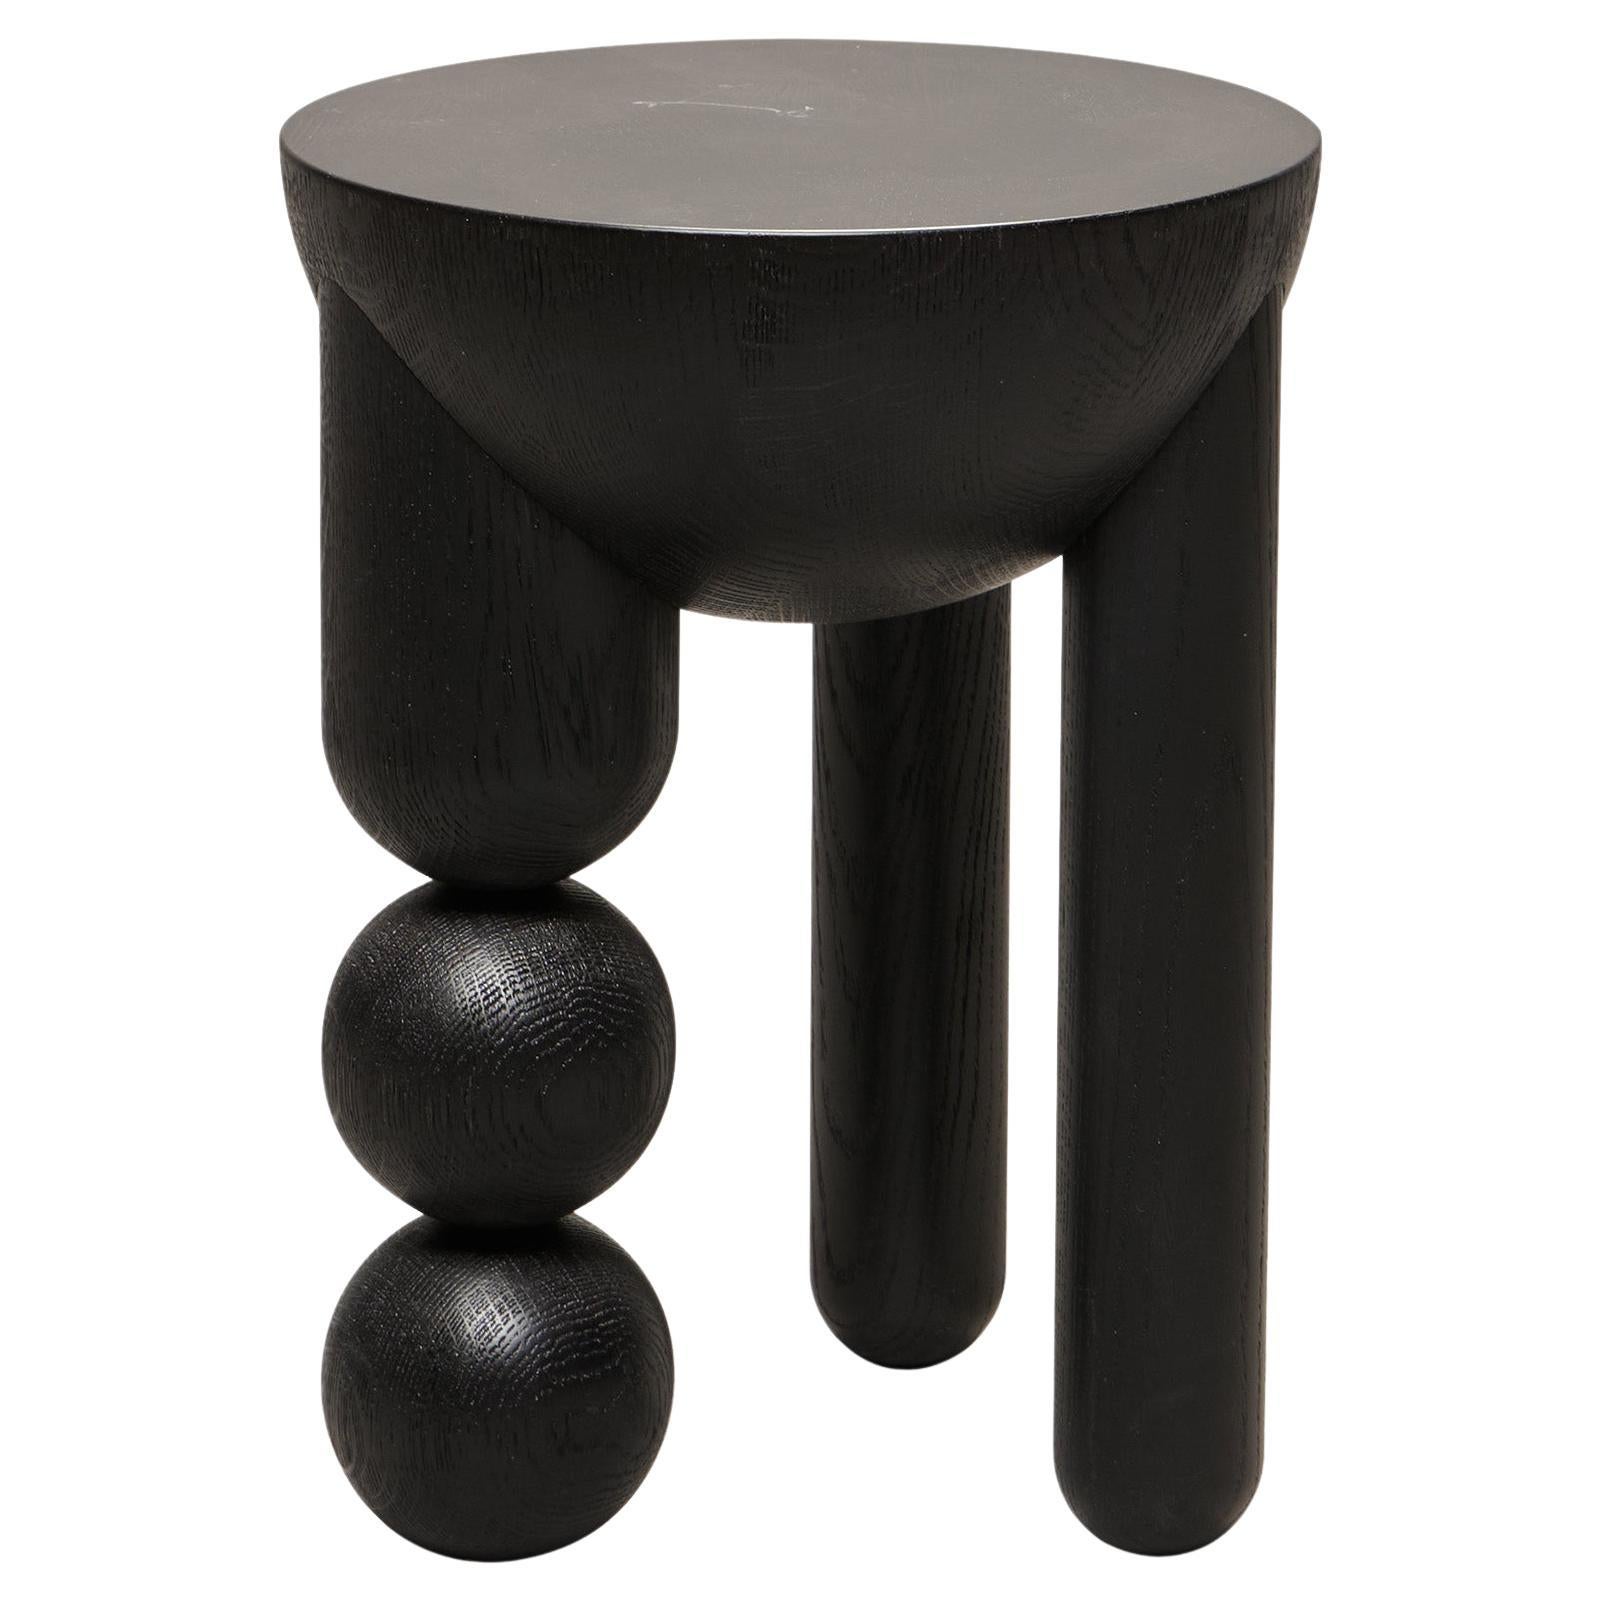 Profiterole Occasional Table, Small by Lara Bohinc in Black Stained Wood